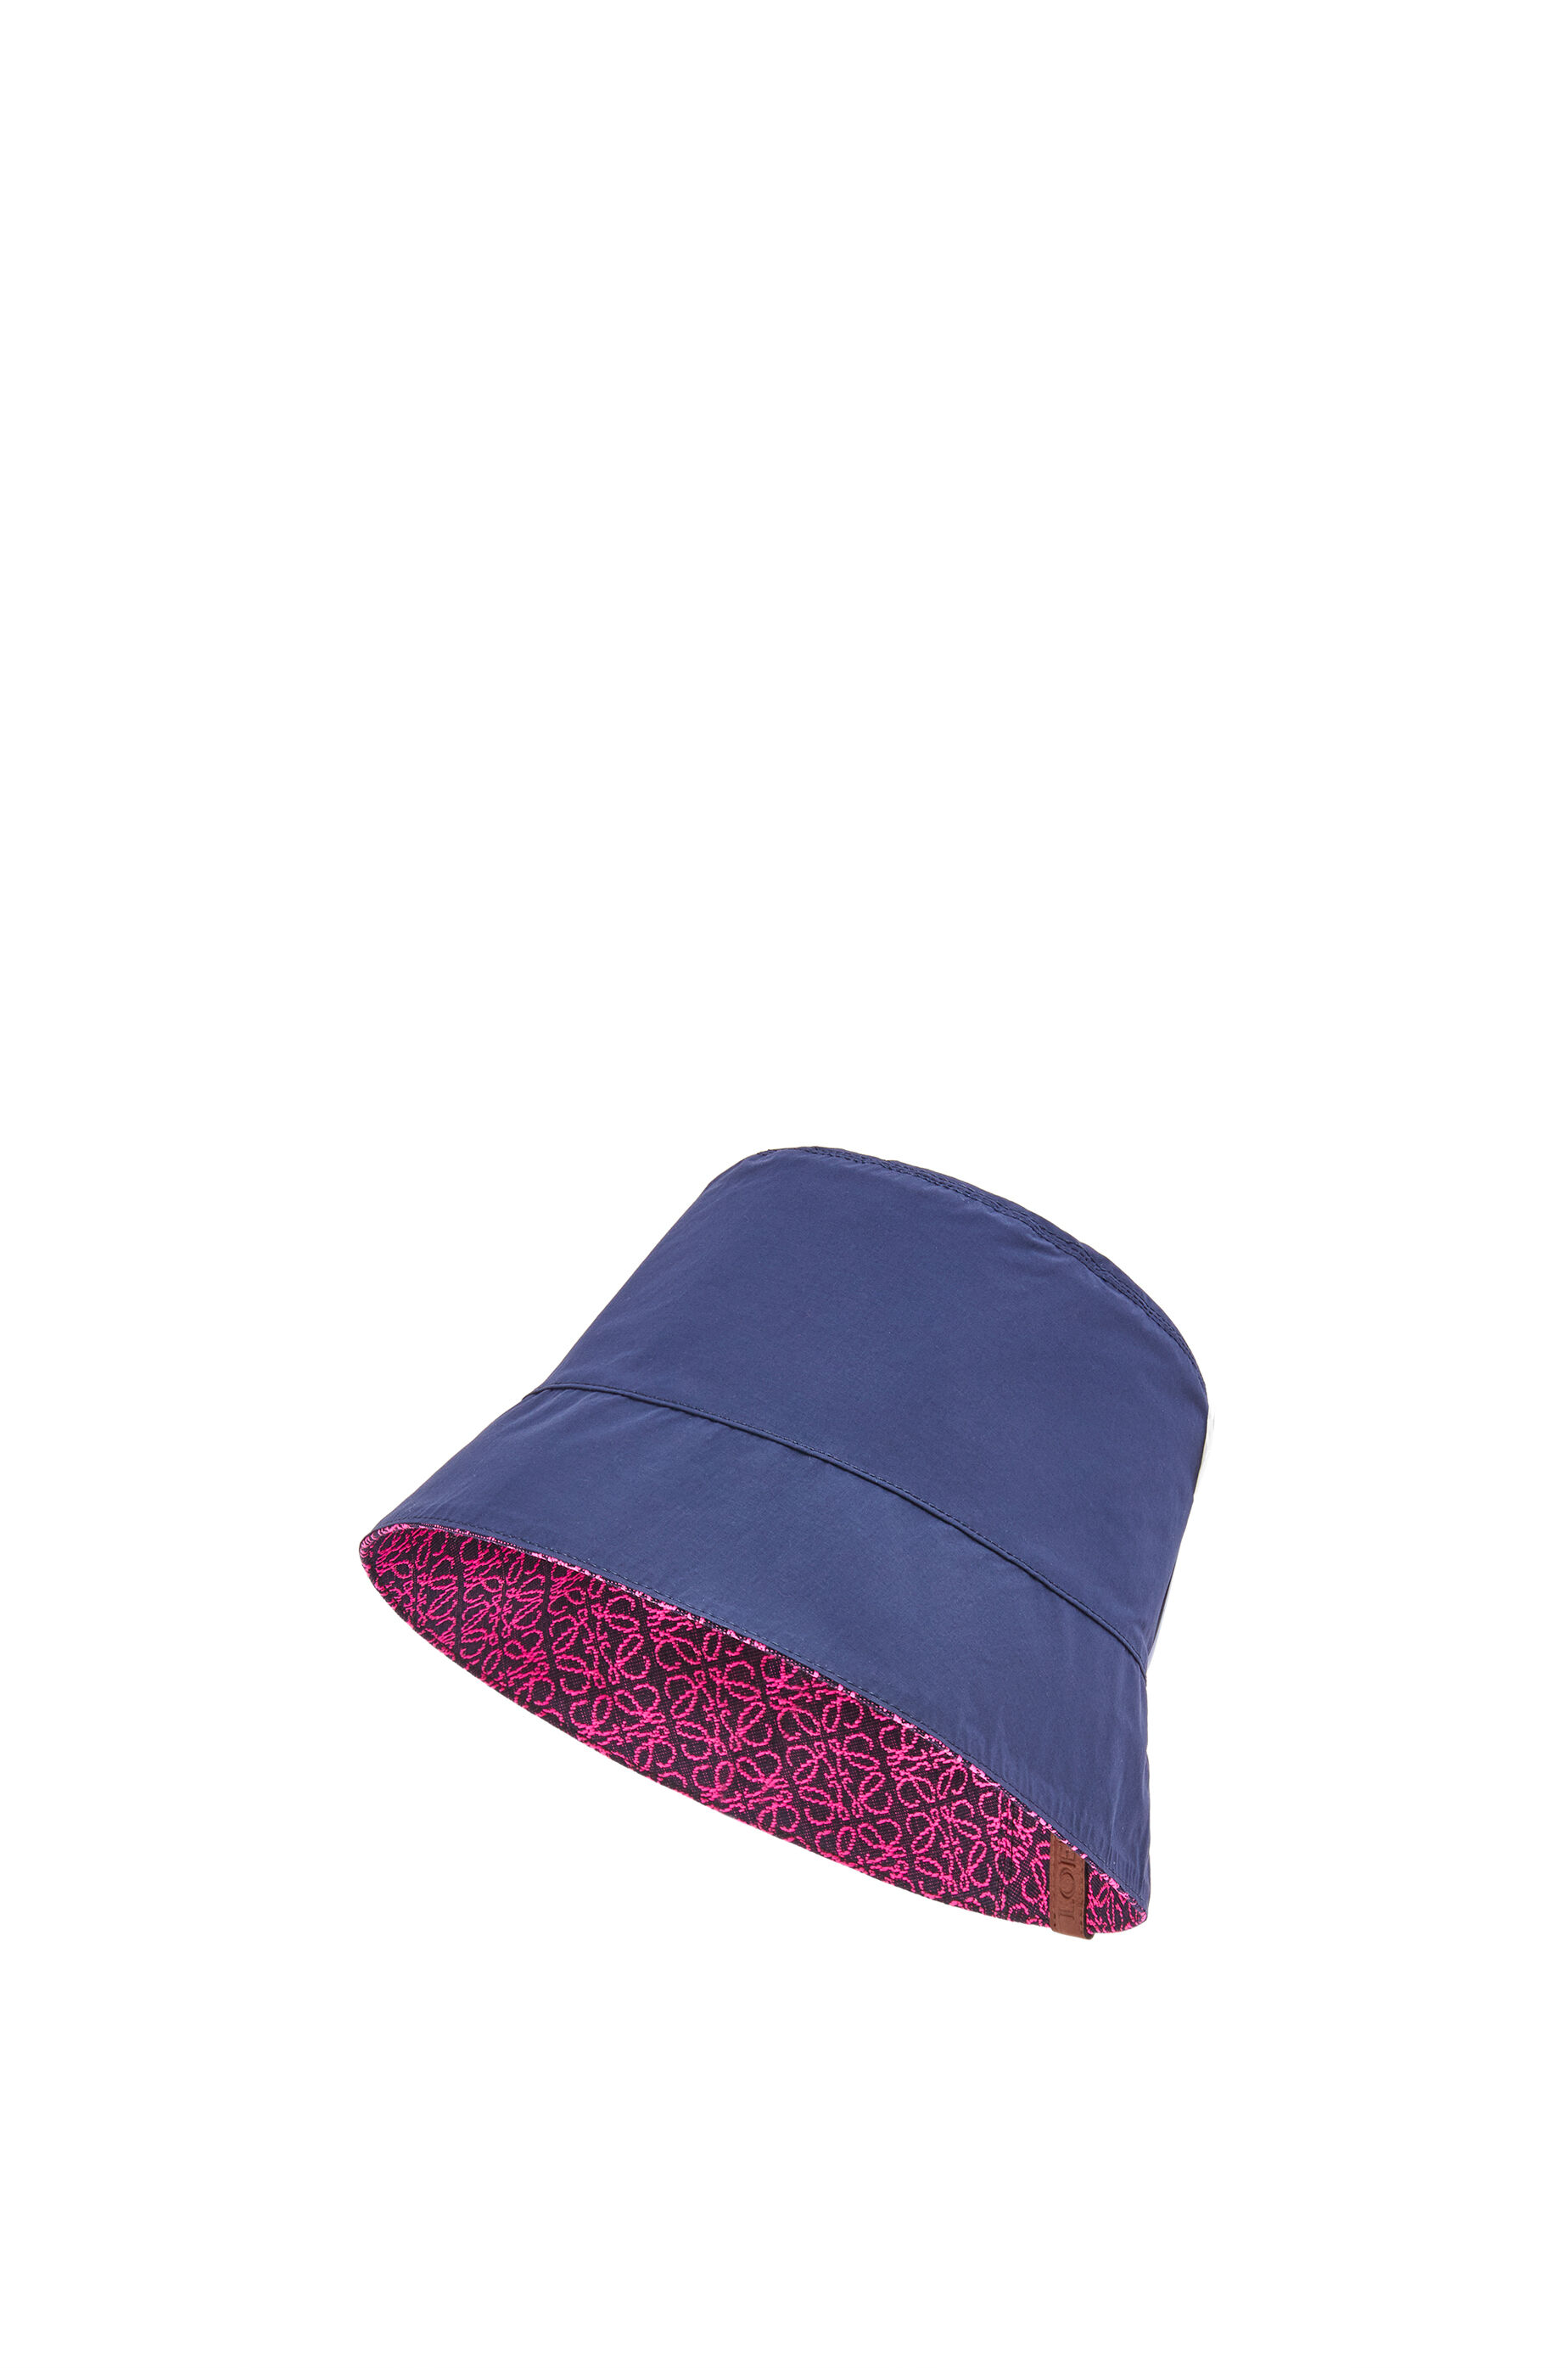 Reversible Anagram bucket hat in jacquard and nylon Neon Pink/Deep 